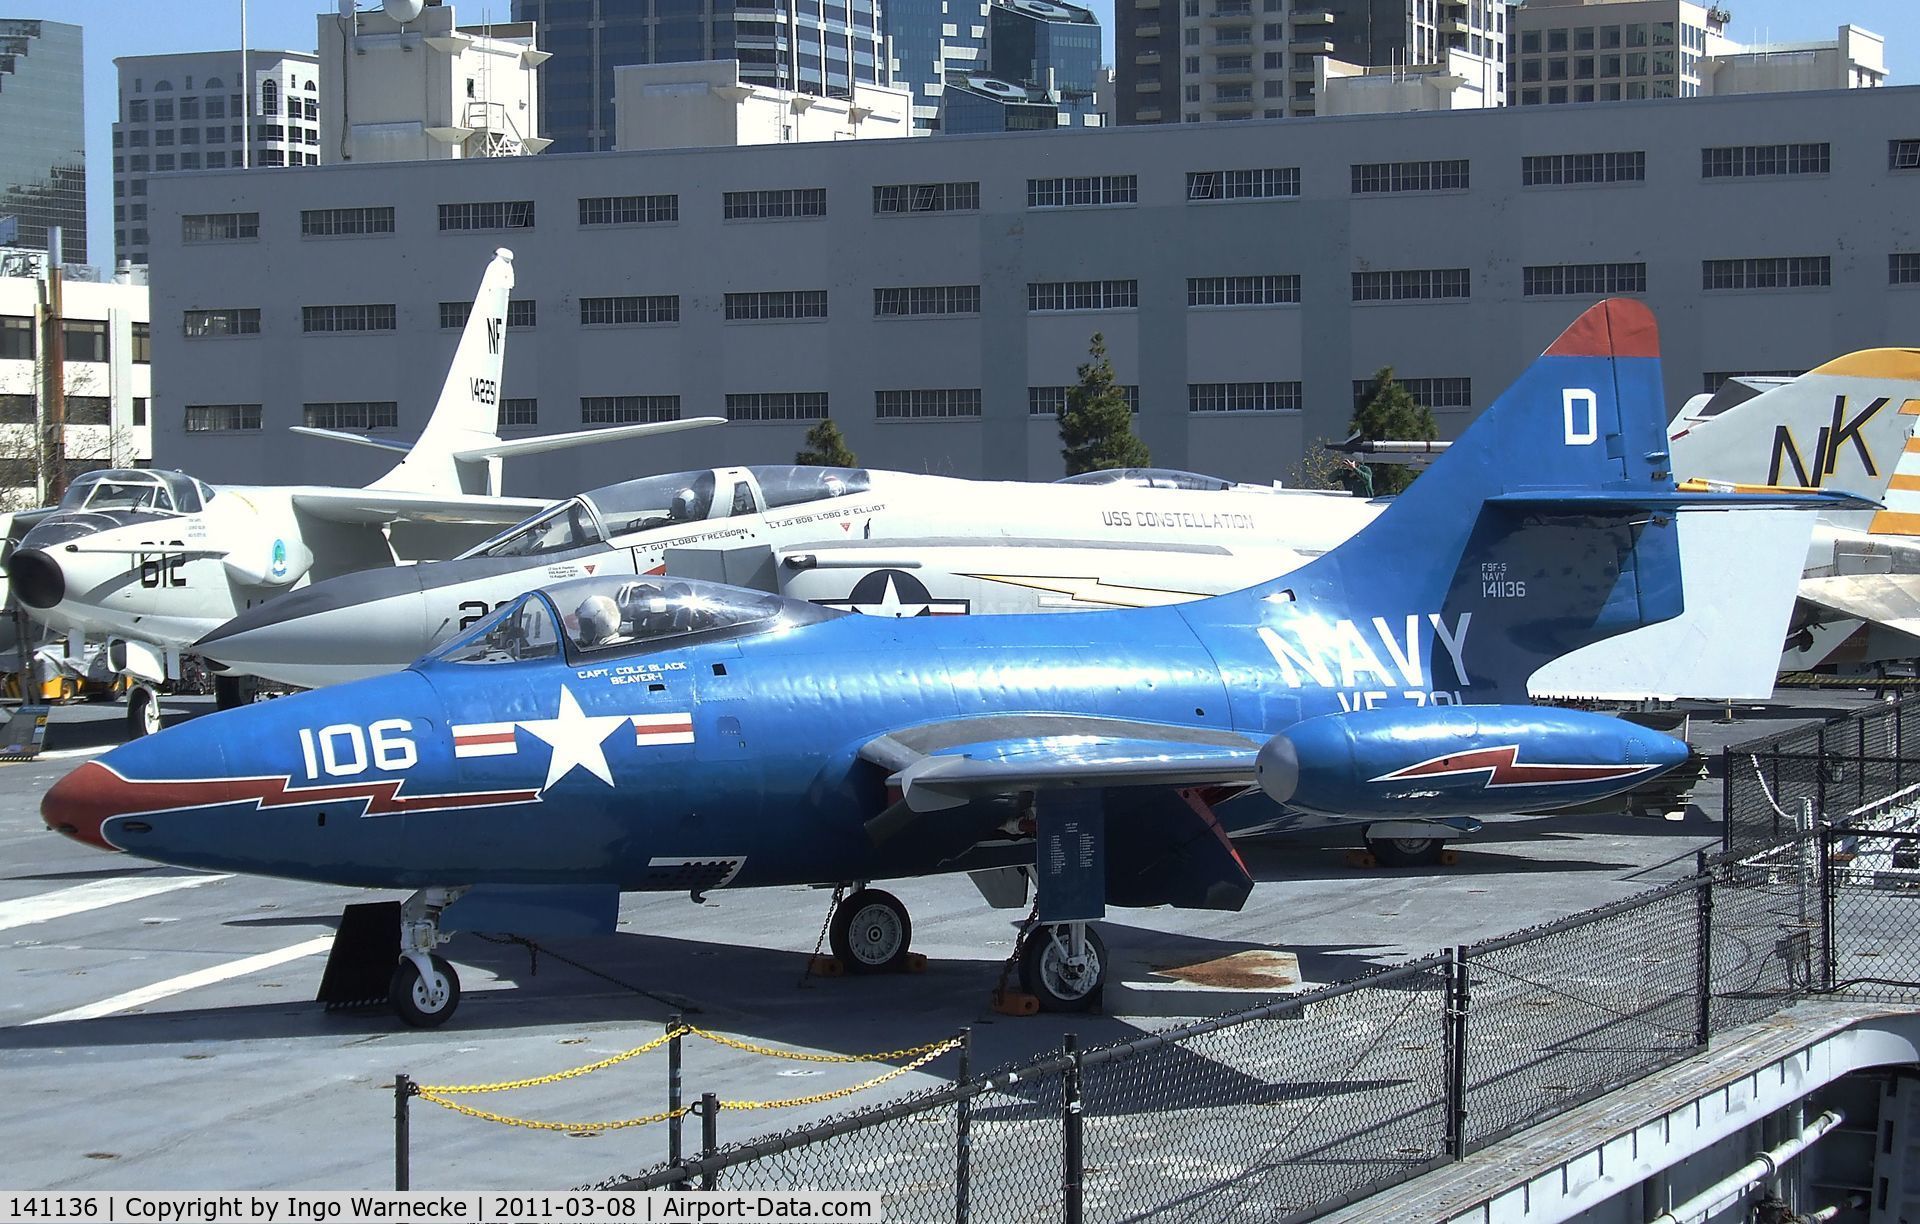 141136, Grumman F9F-8 Cougar C/N Not found 141136, Grumman F9F-5 Panther on the flight deck of the USS Midway Museum, San Diego CA